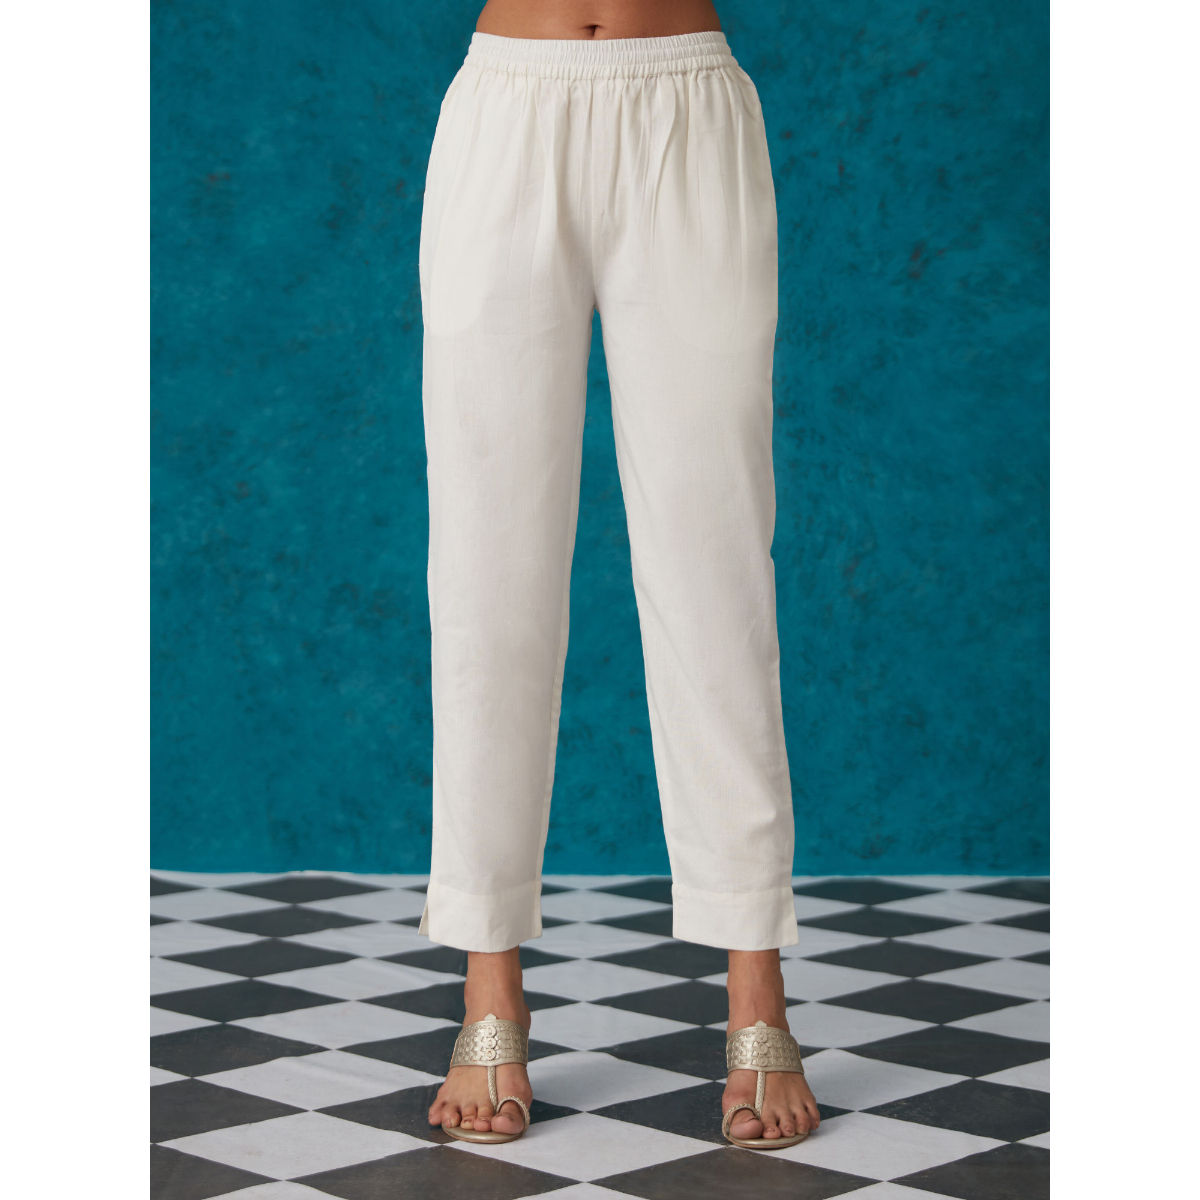 Cotton flex pant – WELL MADE Fashion For New Generation